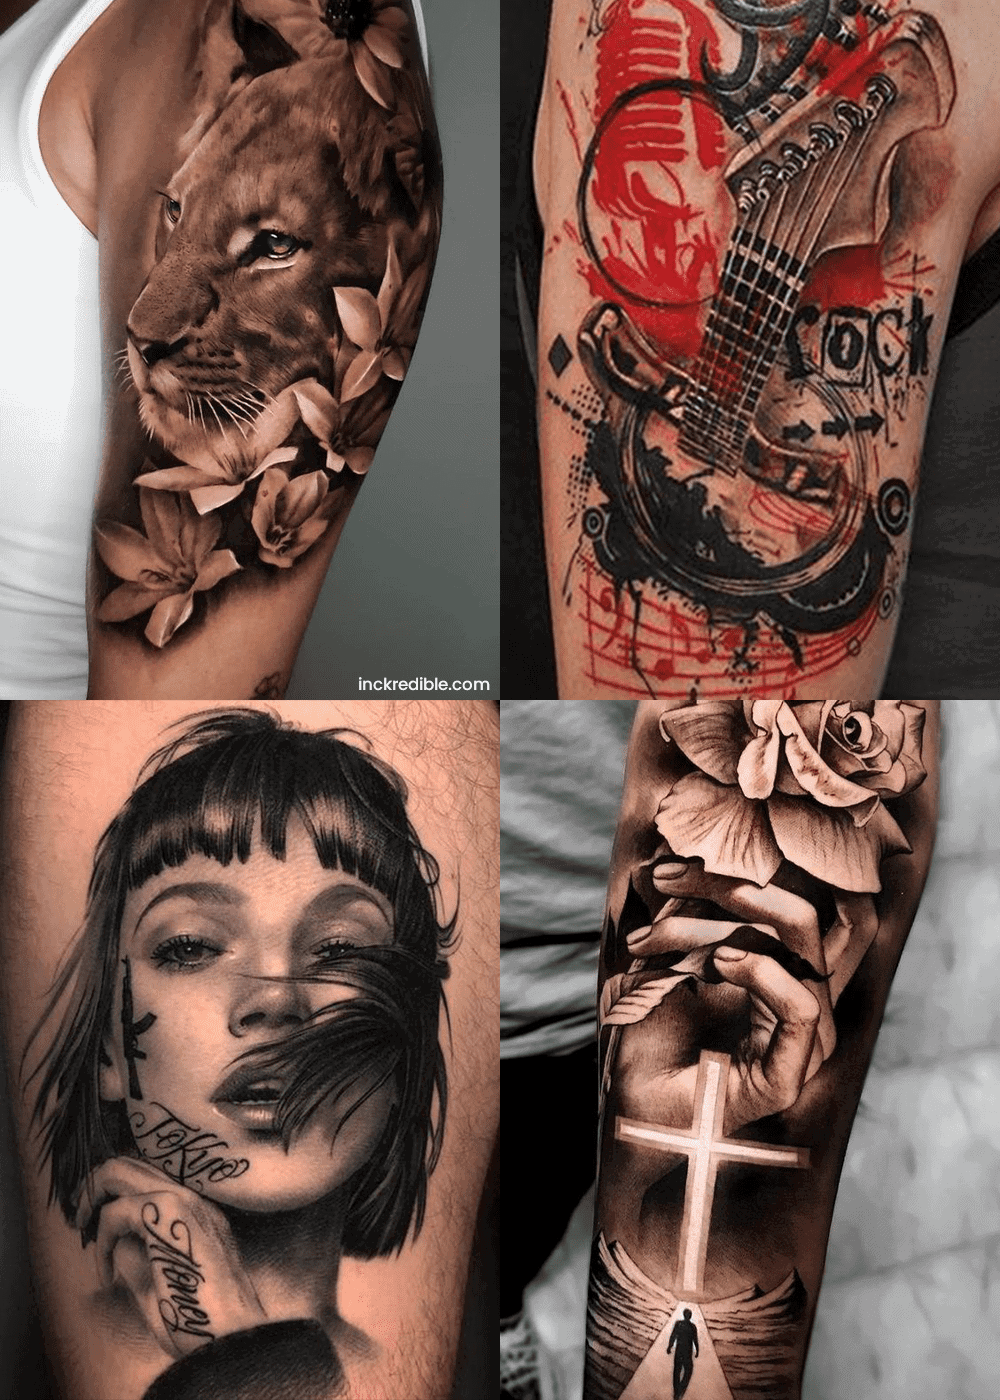 10 Different Types of Tattoo Styles That Are Really Popular - Part I -  Bored Art